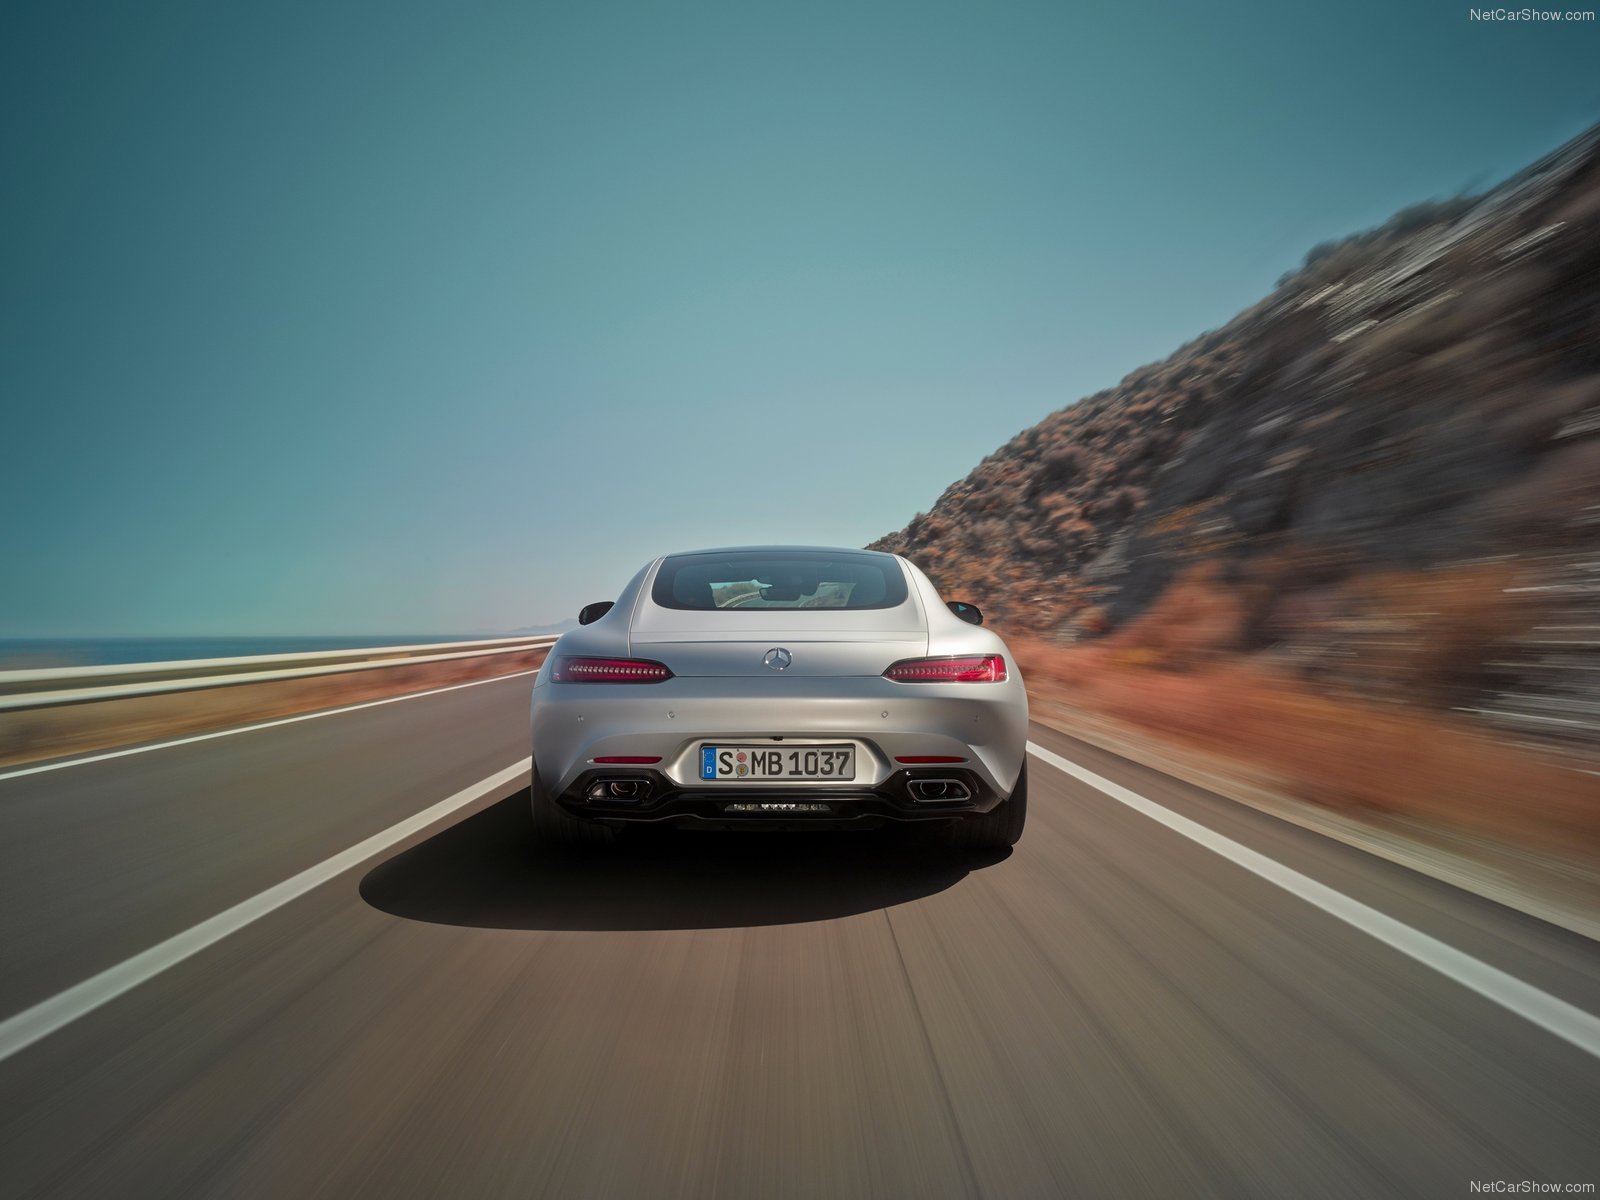 mercedes, Benz, Amg, Gt, Coupe, Cars, 2015, Germany, Gris, Gray Wallpaper